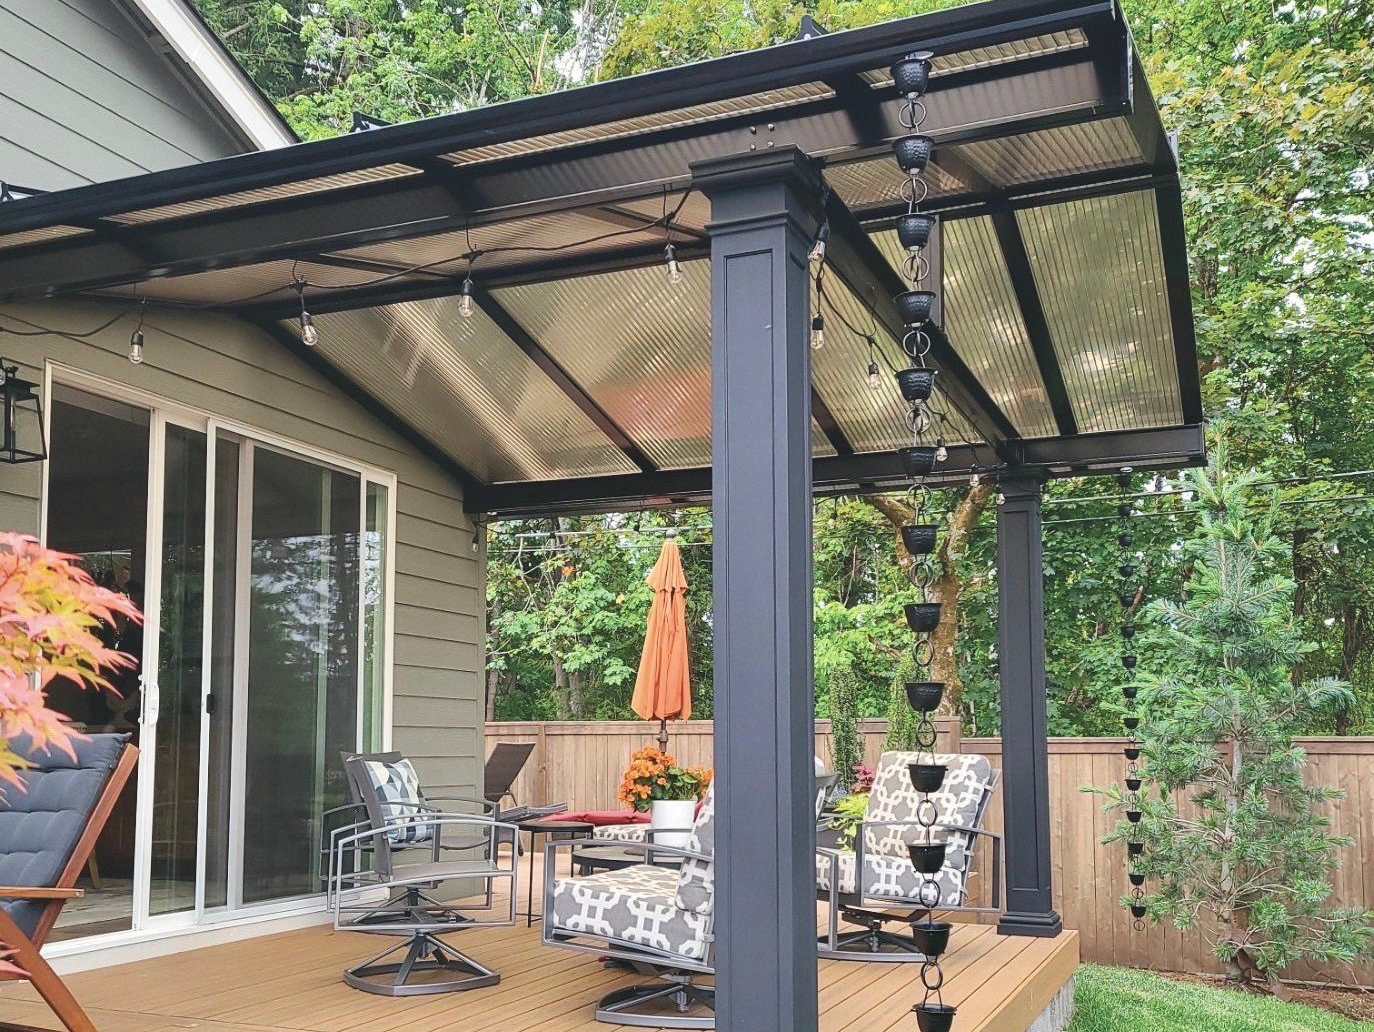 Patio Covers in Tigard Oregon - Gable Roof with ACRYLITE Acrylic